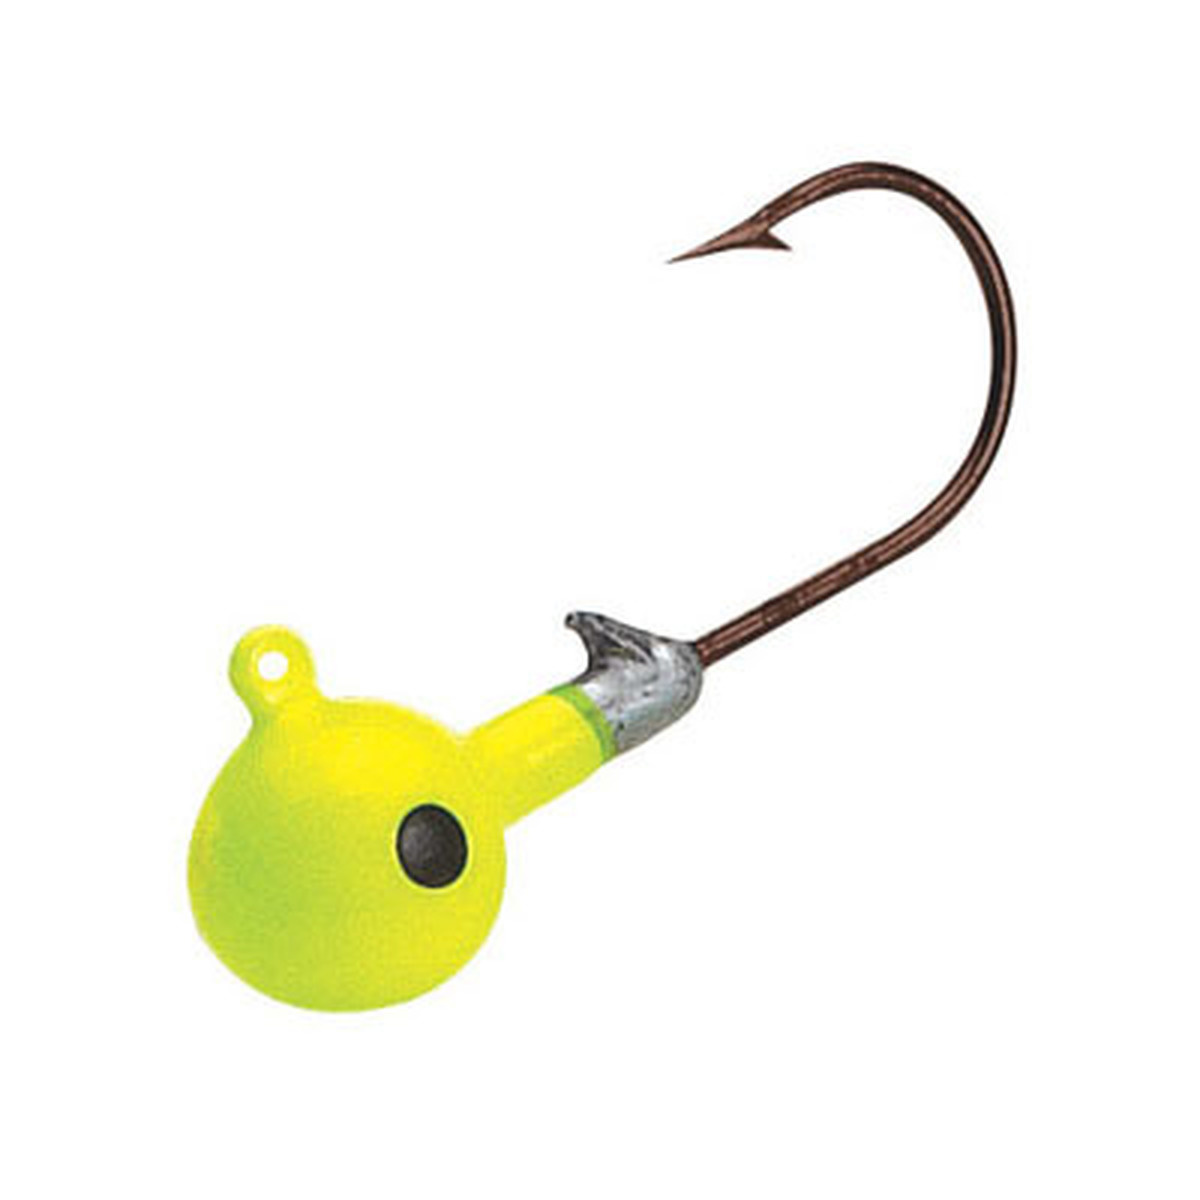 Northland Nature Jig - Lead Free